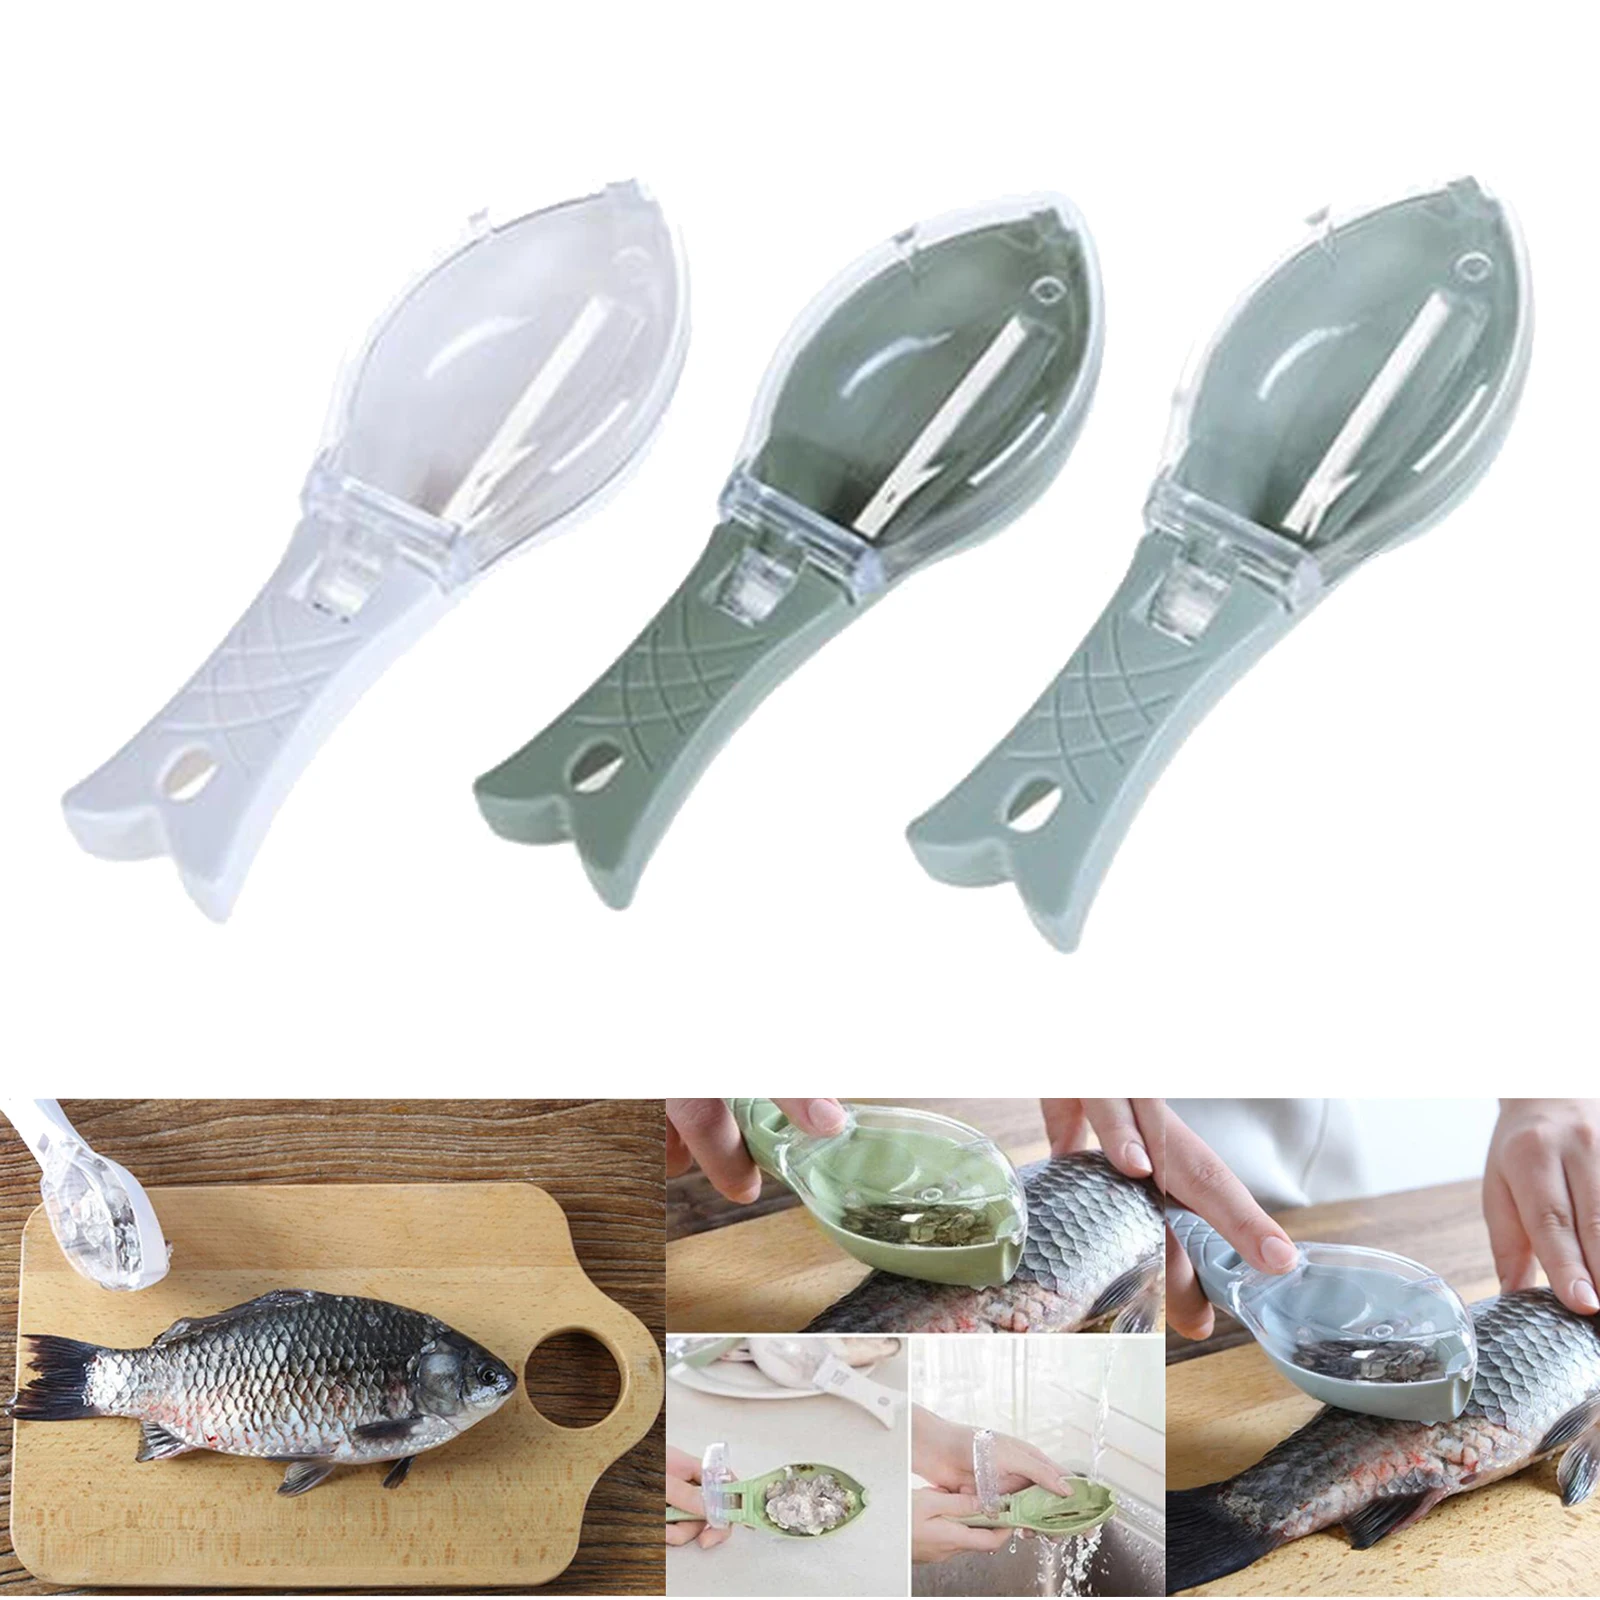 

Fish Scaler - Easily Remove Fish Scales Without Fuss or Mess - Practical Kitchen Tools